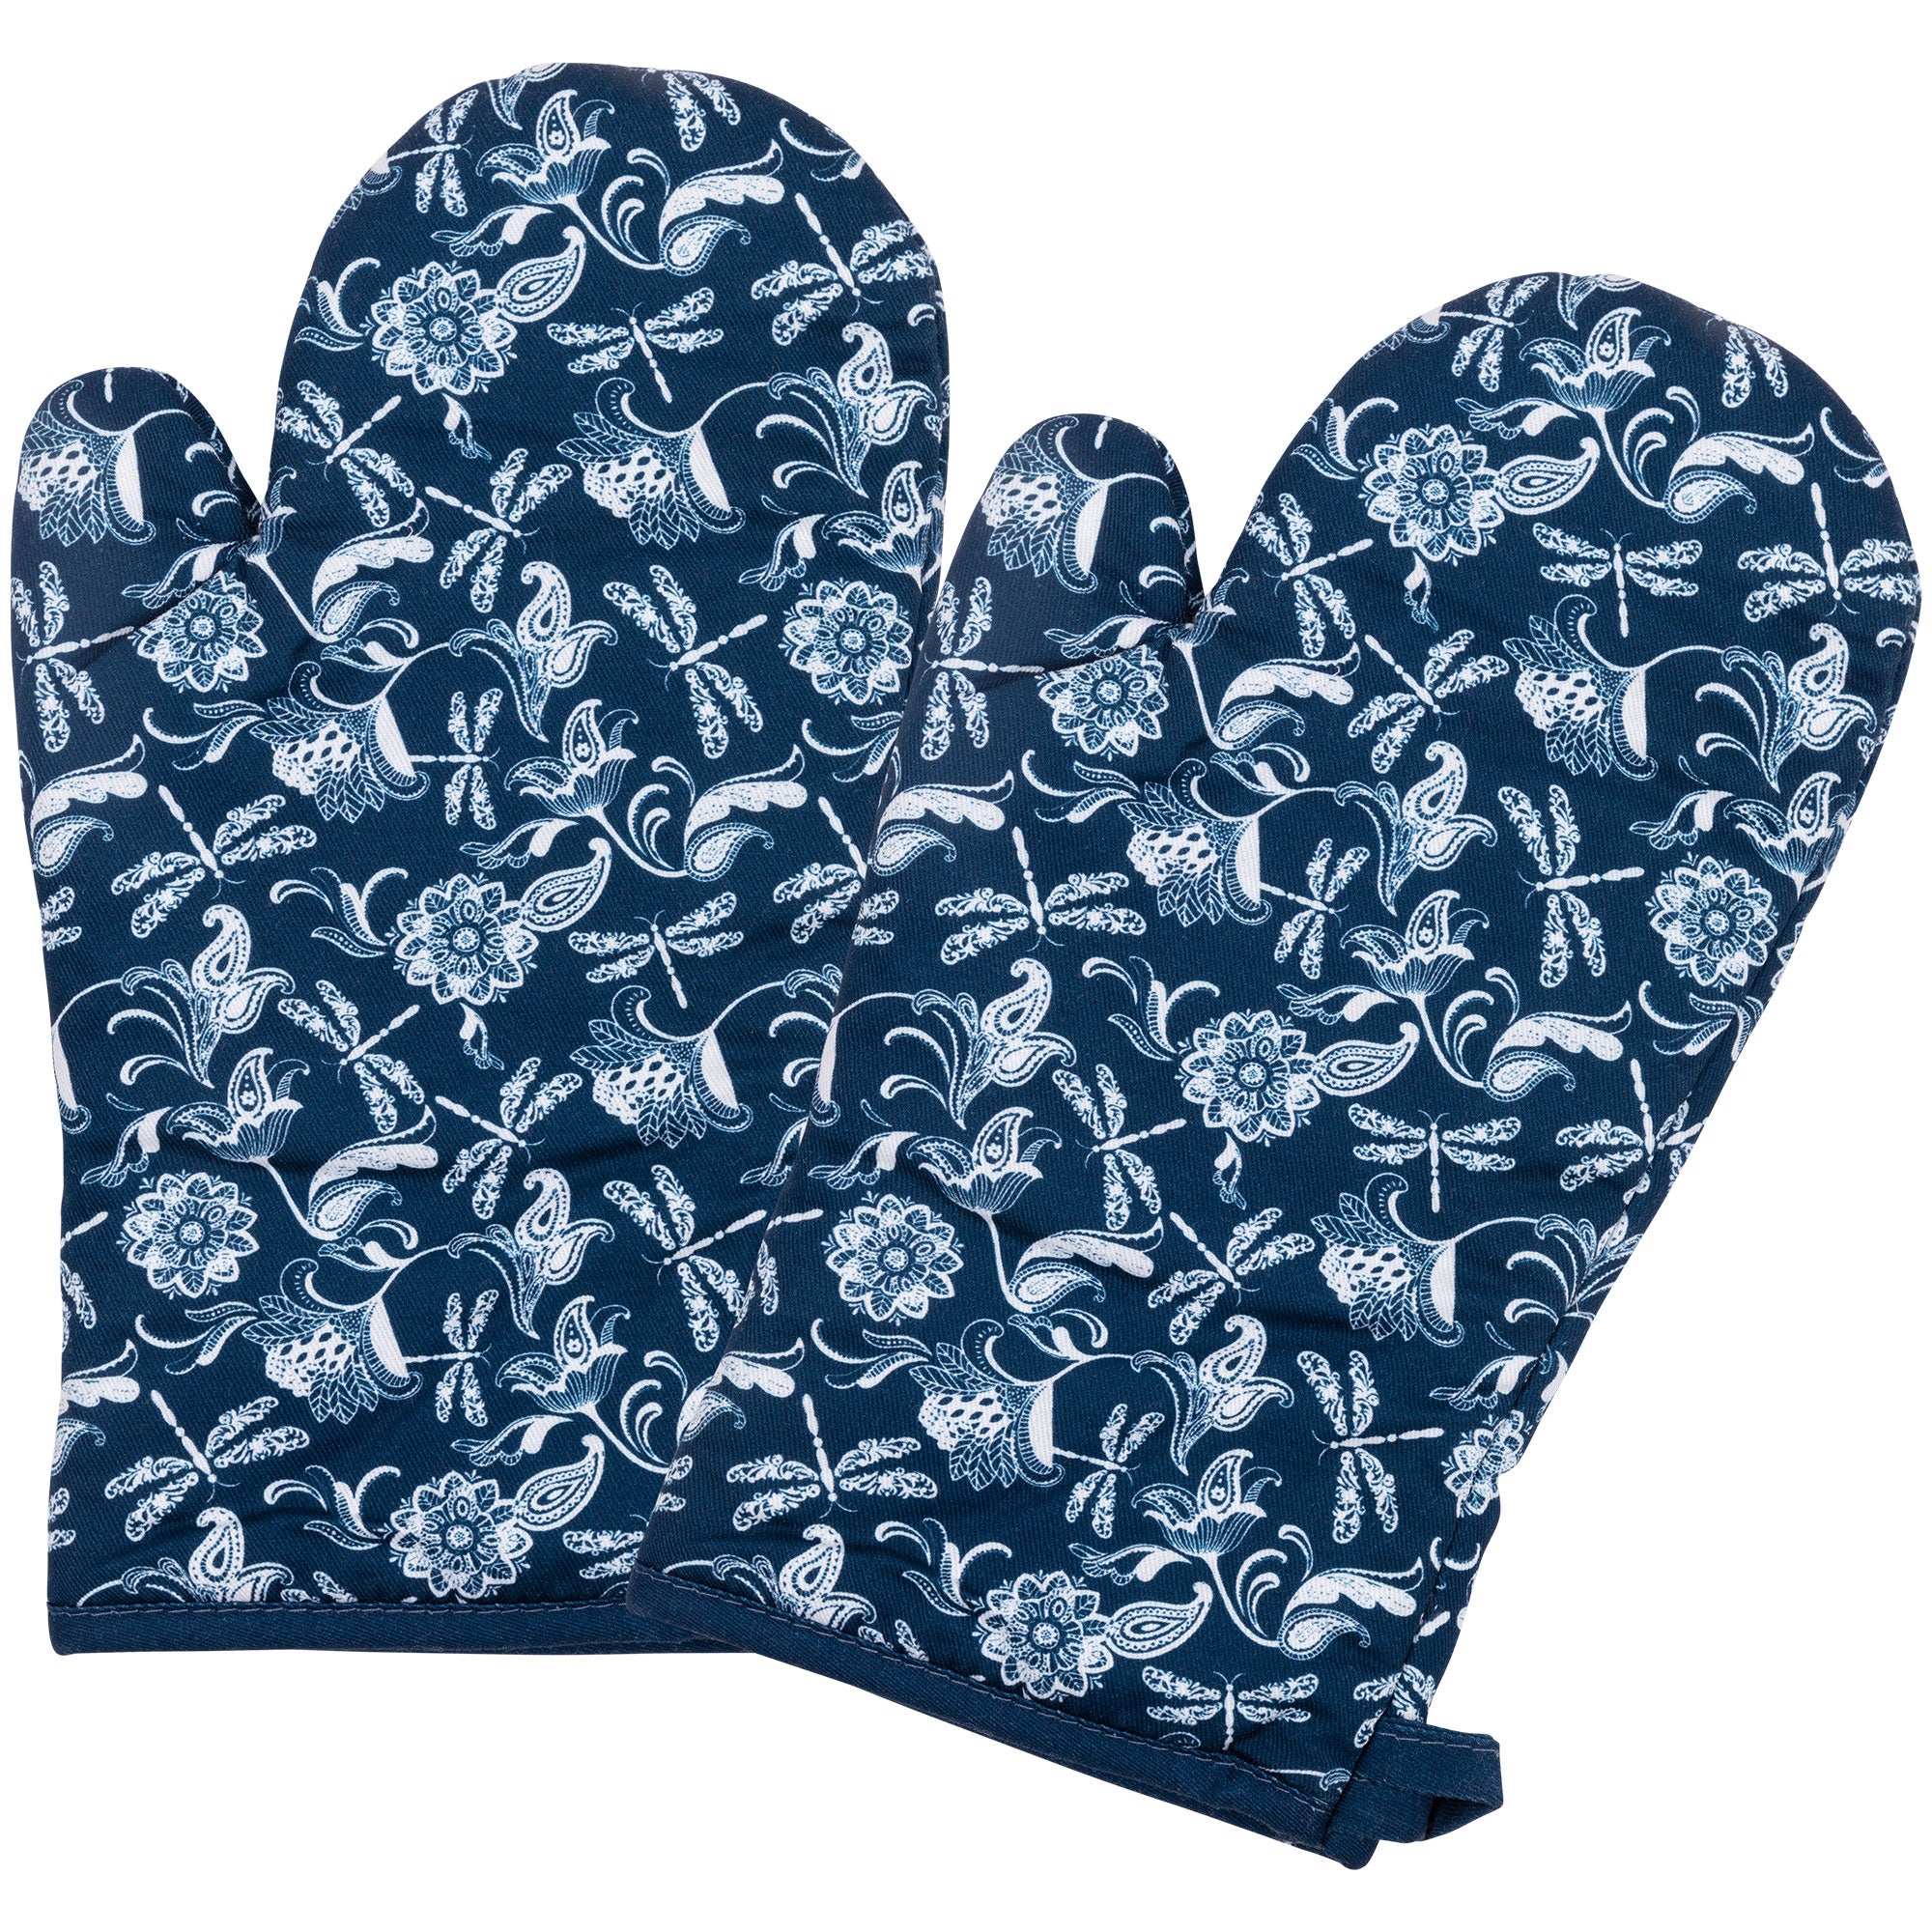 Blue Paisley Dragonflies Kitchen Linens - Oven Mitts - Set Of 2